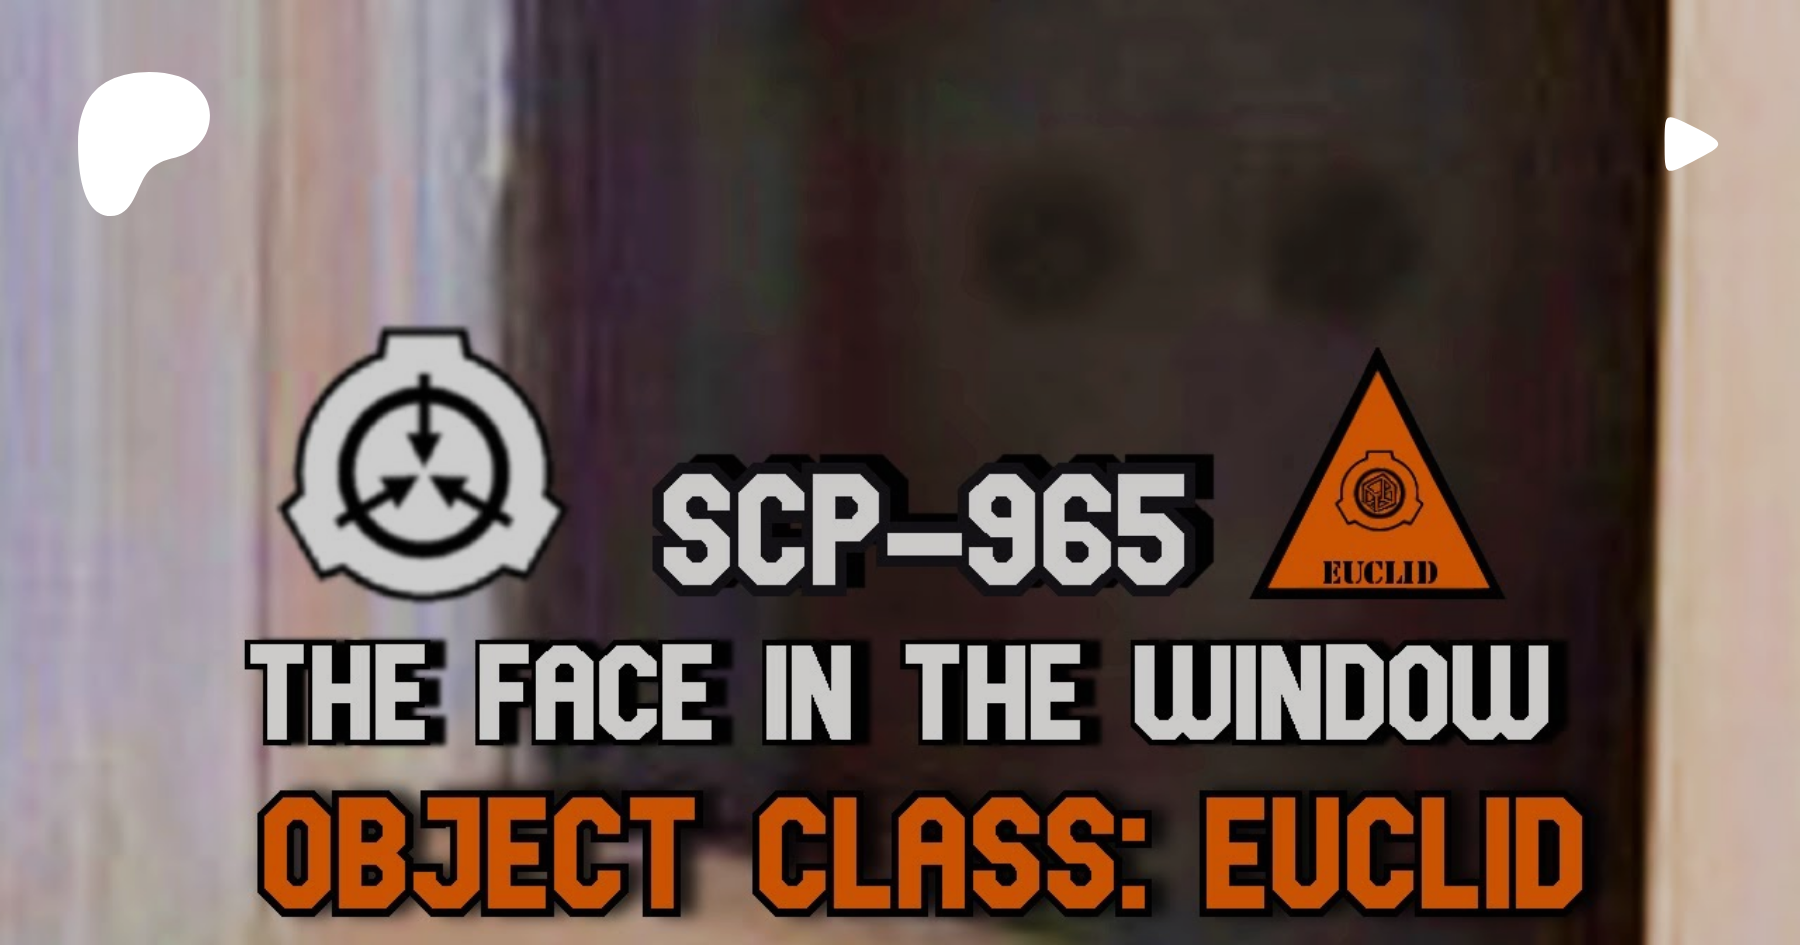 SCP-965 - SCP Foundation